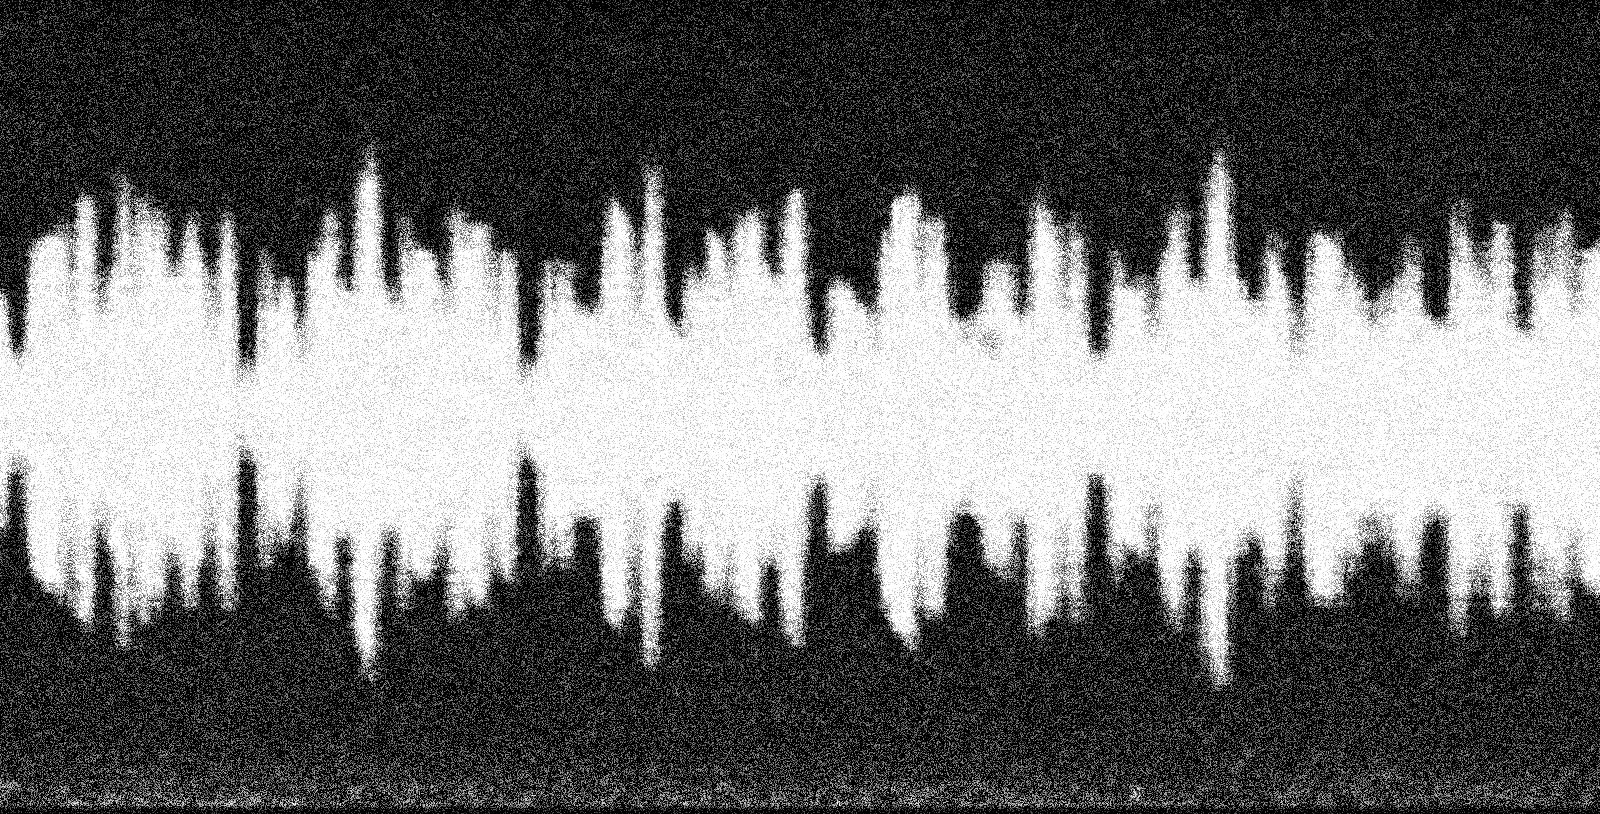 A grainy black-and-white close-up image showing a section of optical sound on film.